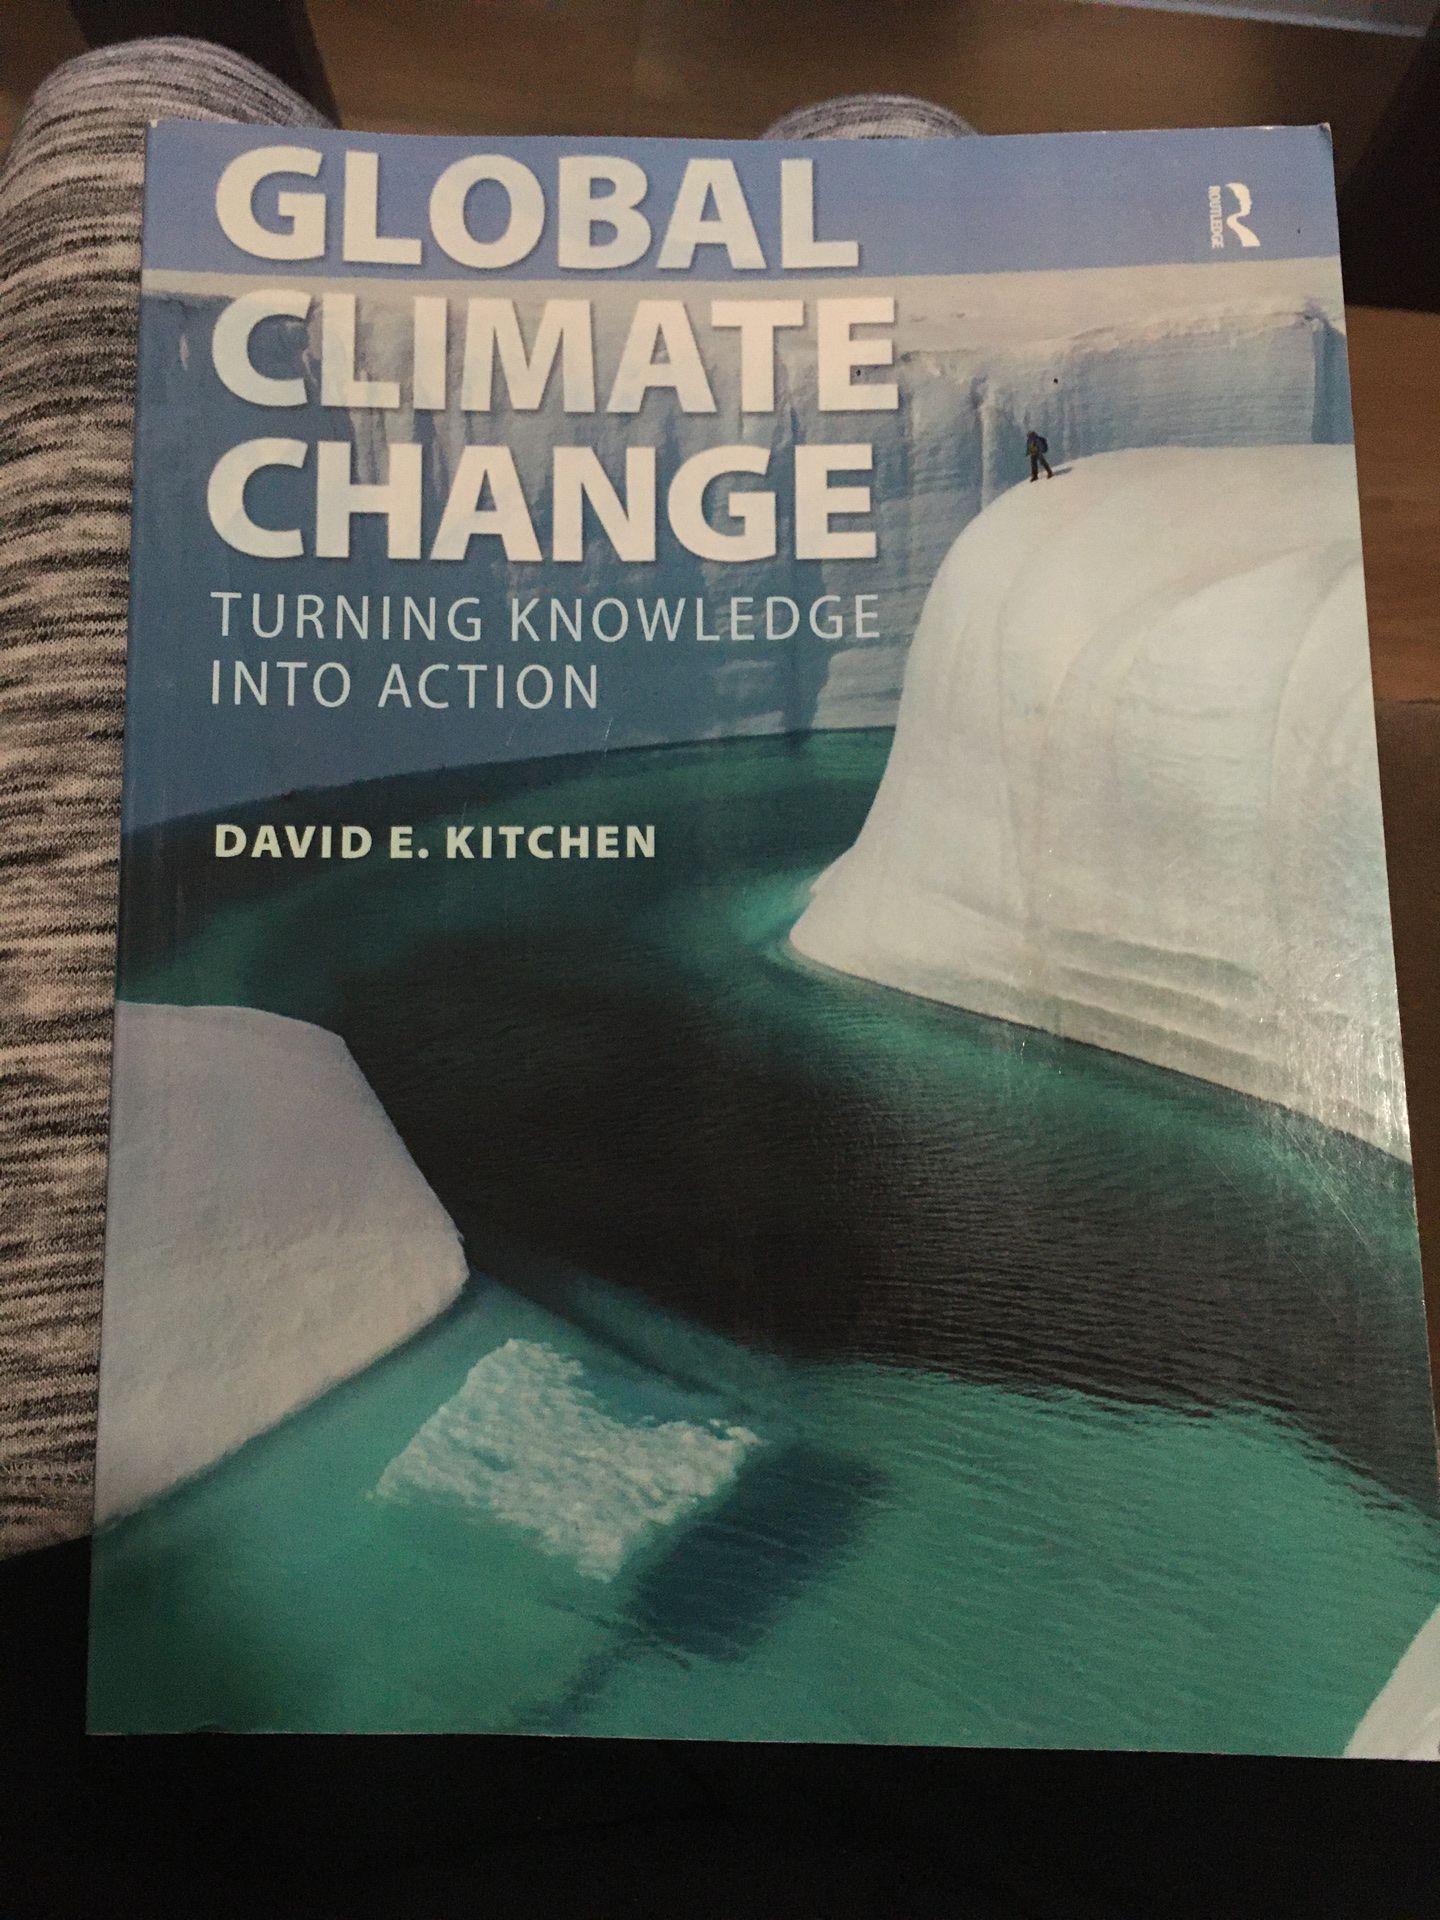 GLOBAL CLIMATE CHANGE TEXTBOOK